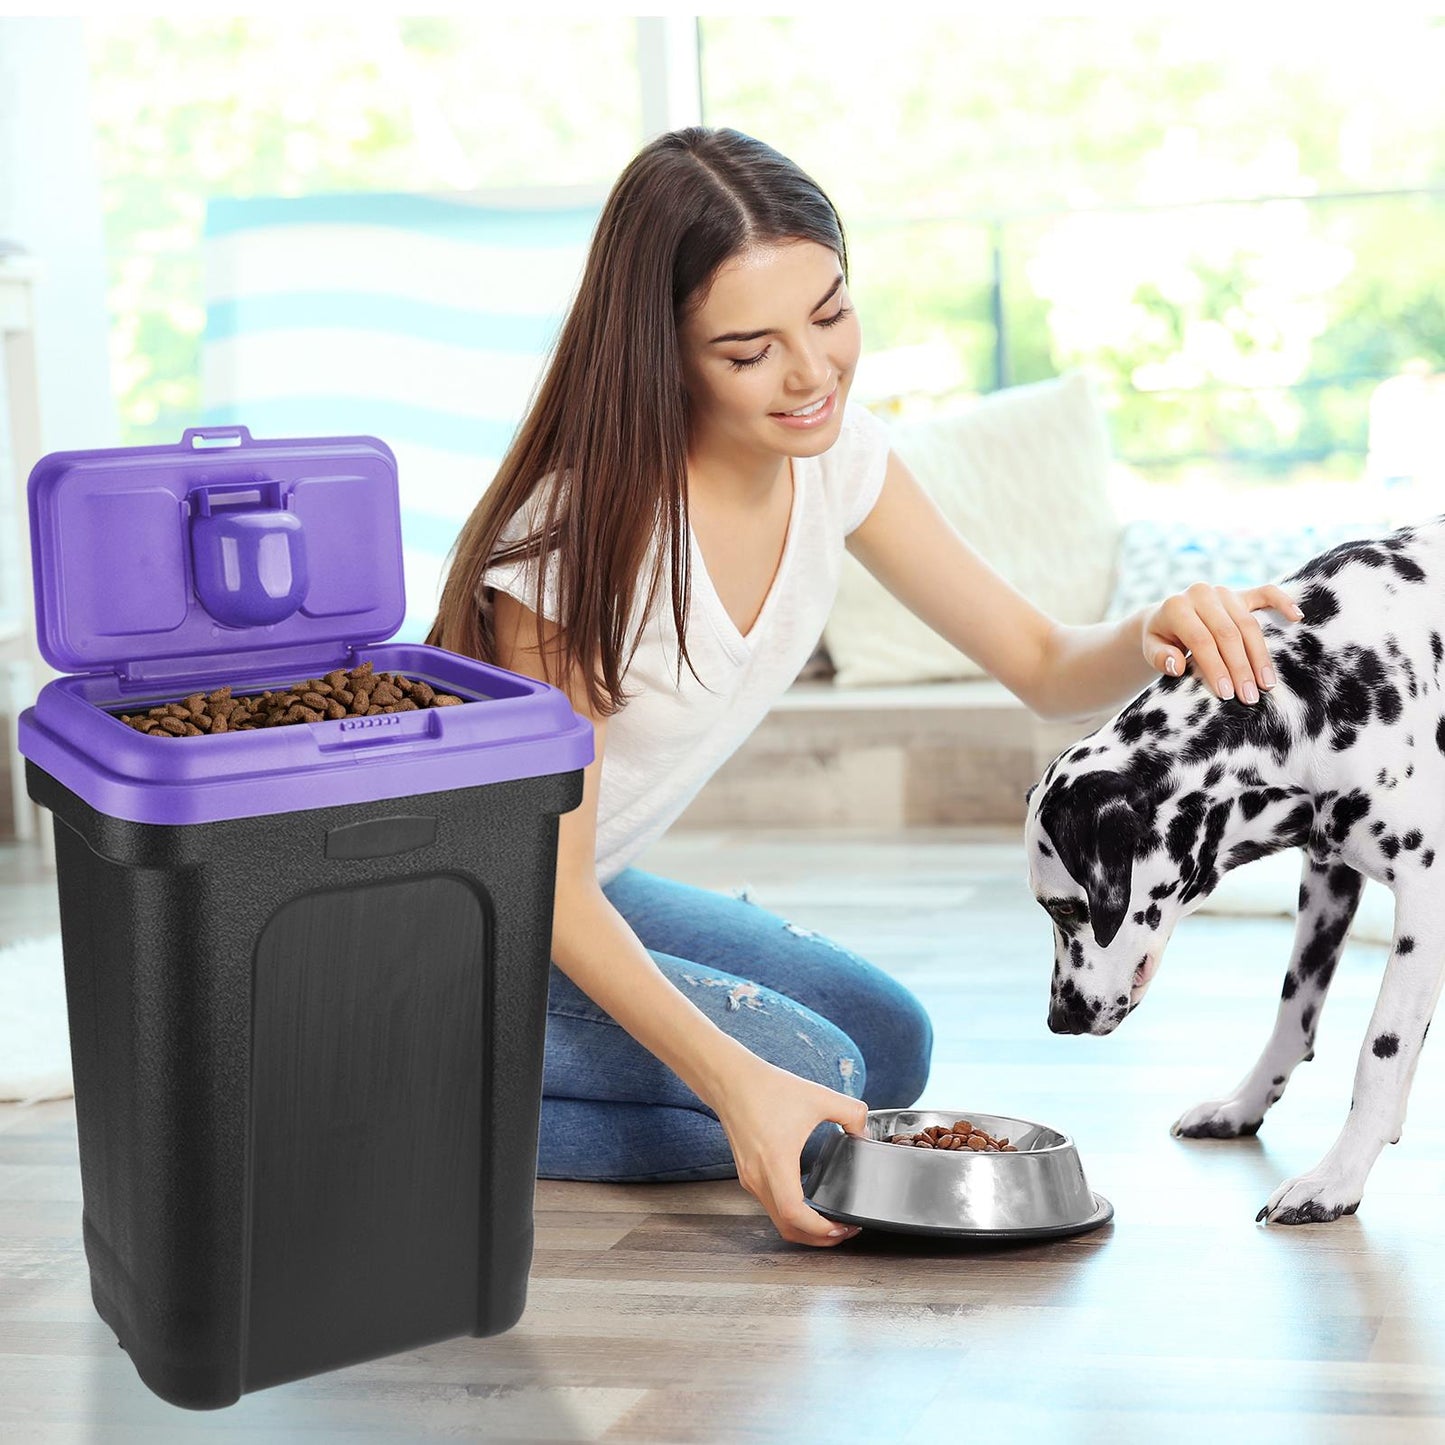 Keep Your Pet's Food Fresh with a Storage Container